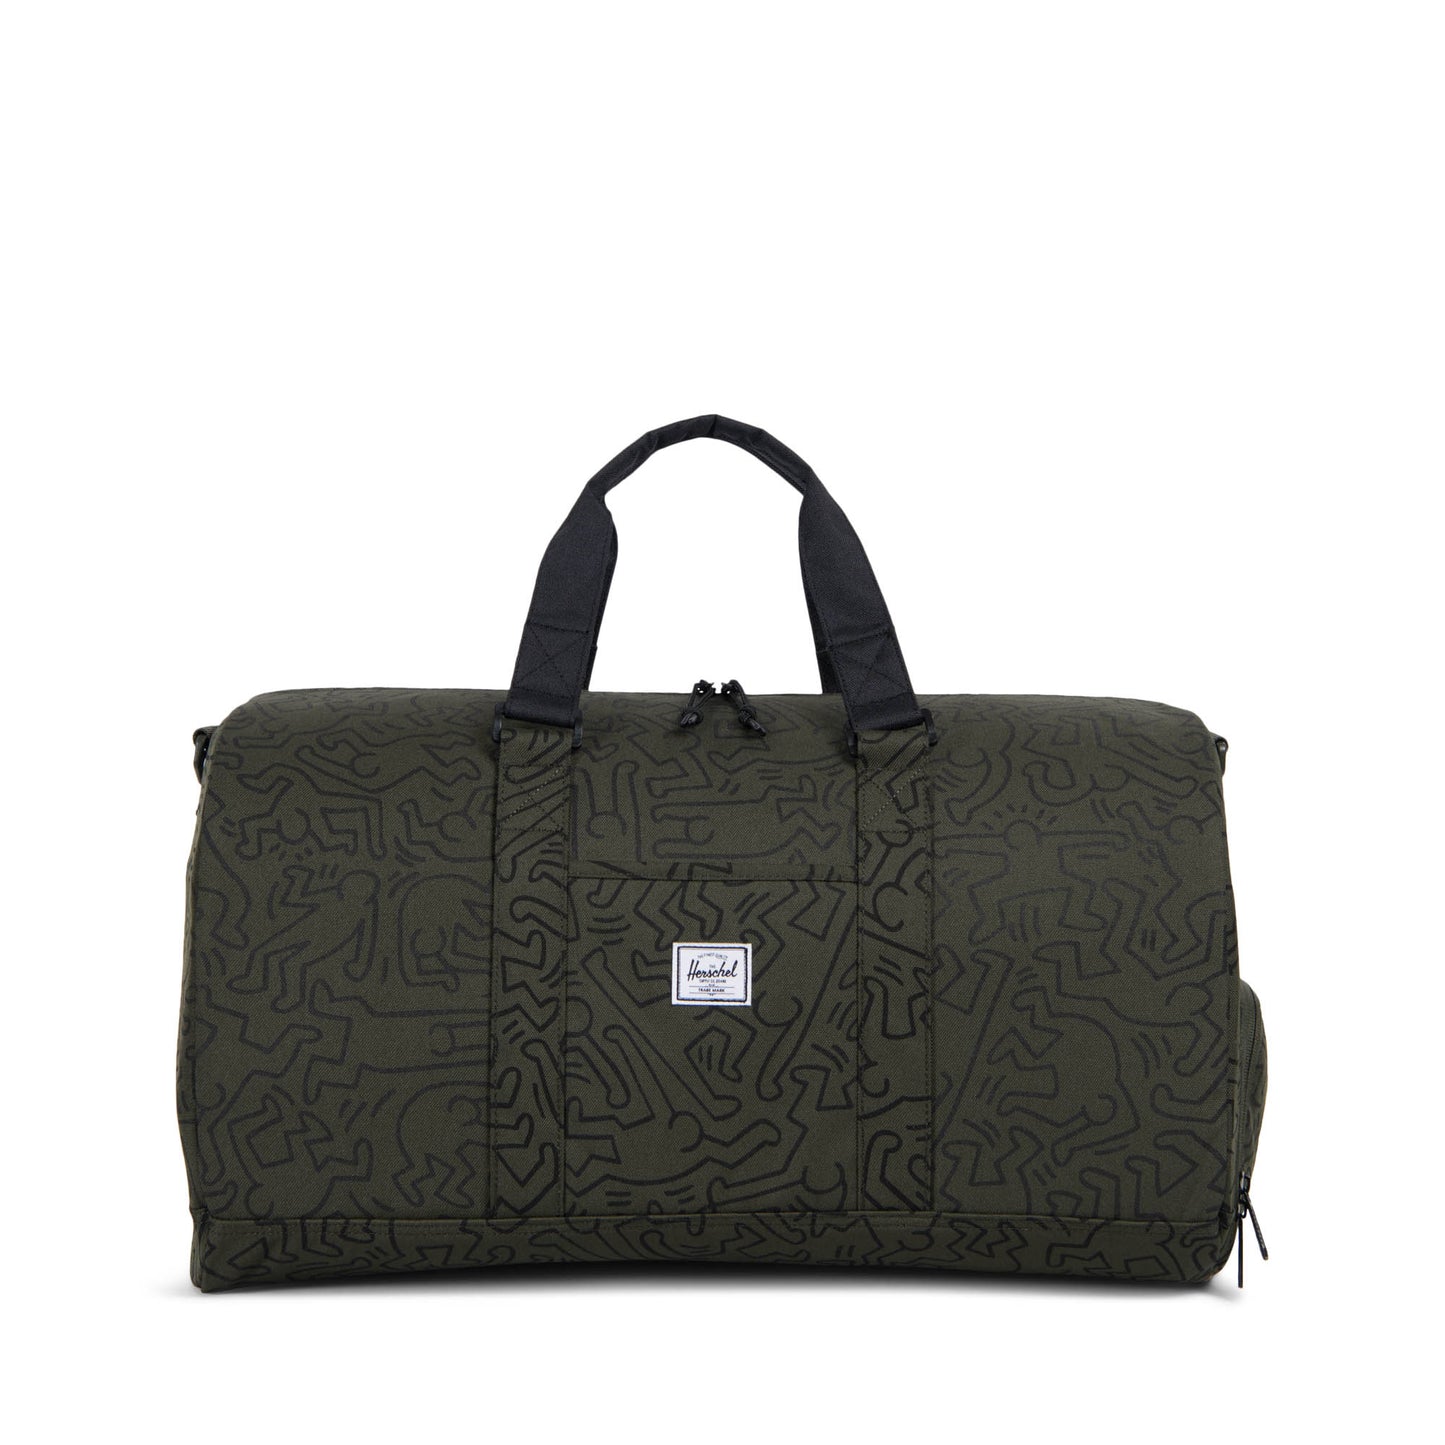 Herschel Supply Co. x Keith Haring - Novel Duffle, Forest Night - The Giant Peach